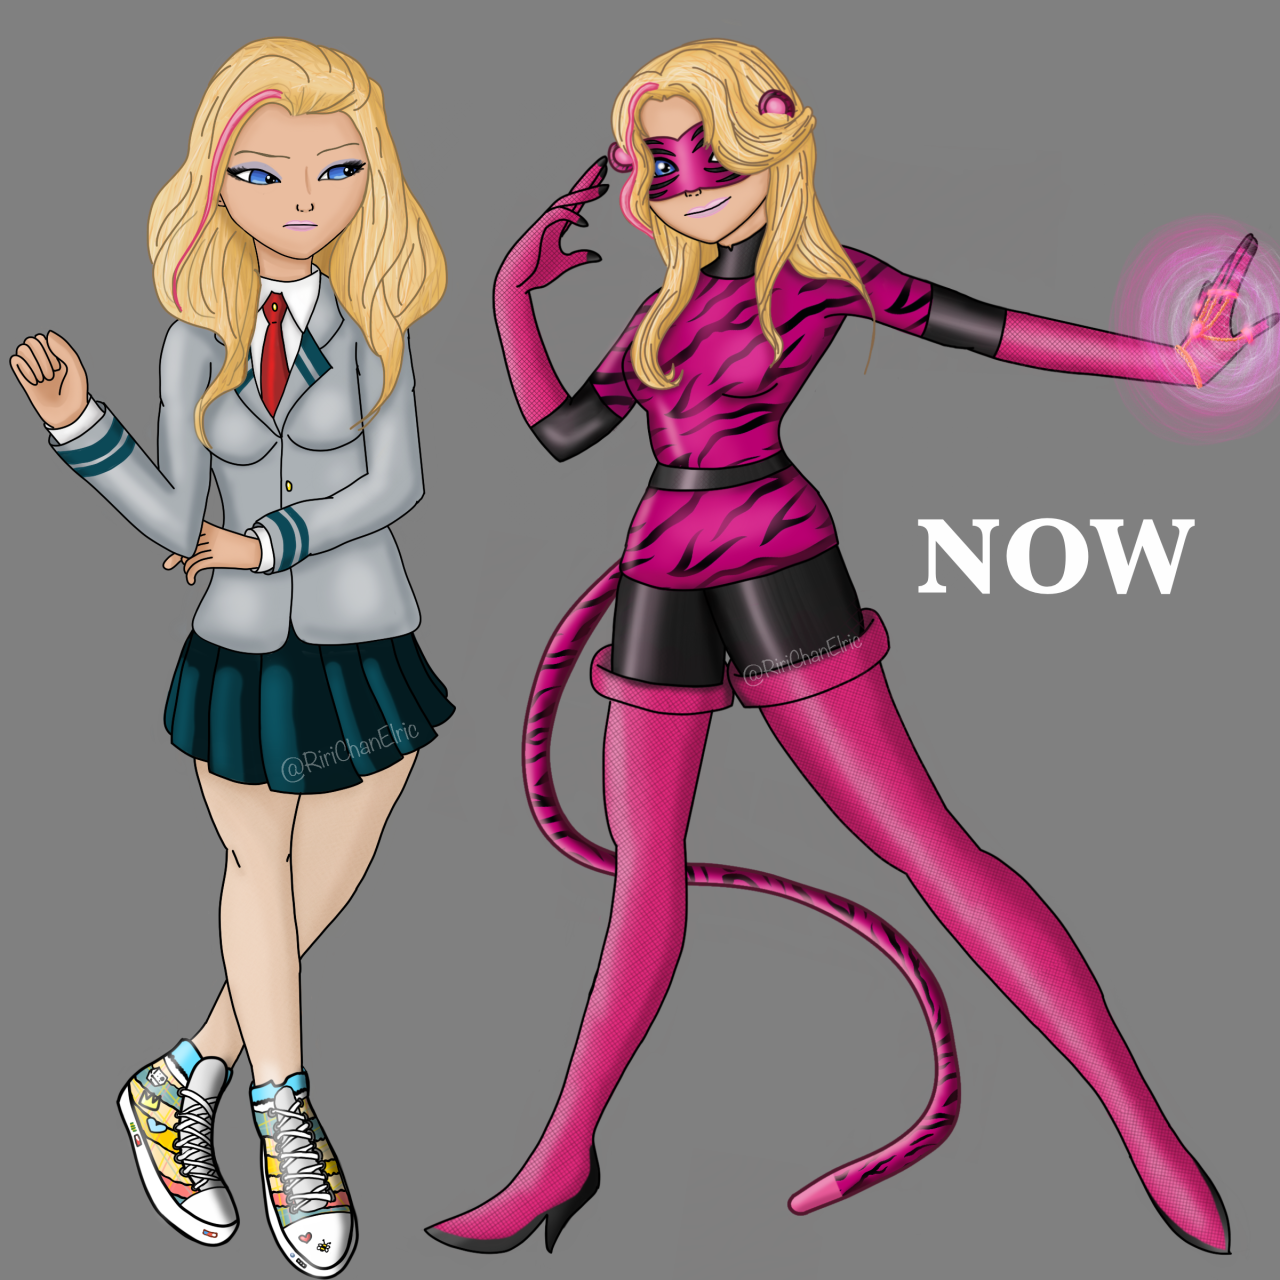 From the first concept, to the second, and right to the final one~ Alright! Now we have Chloe Bourgeois in her Miraculous 